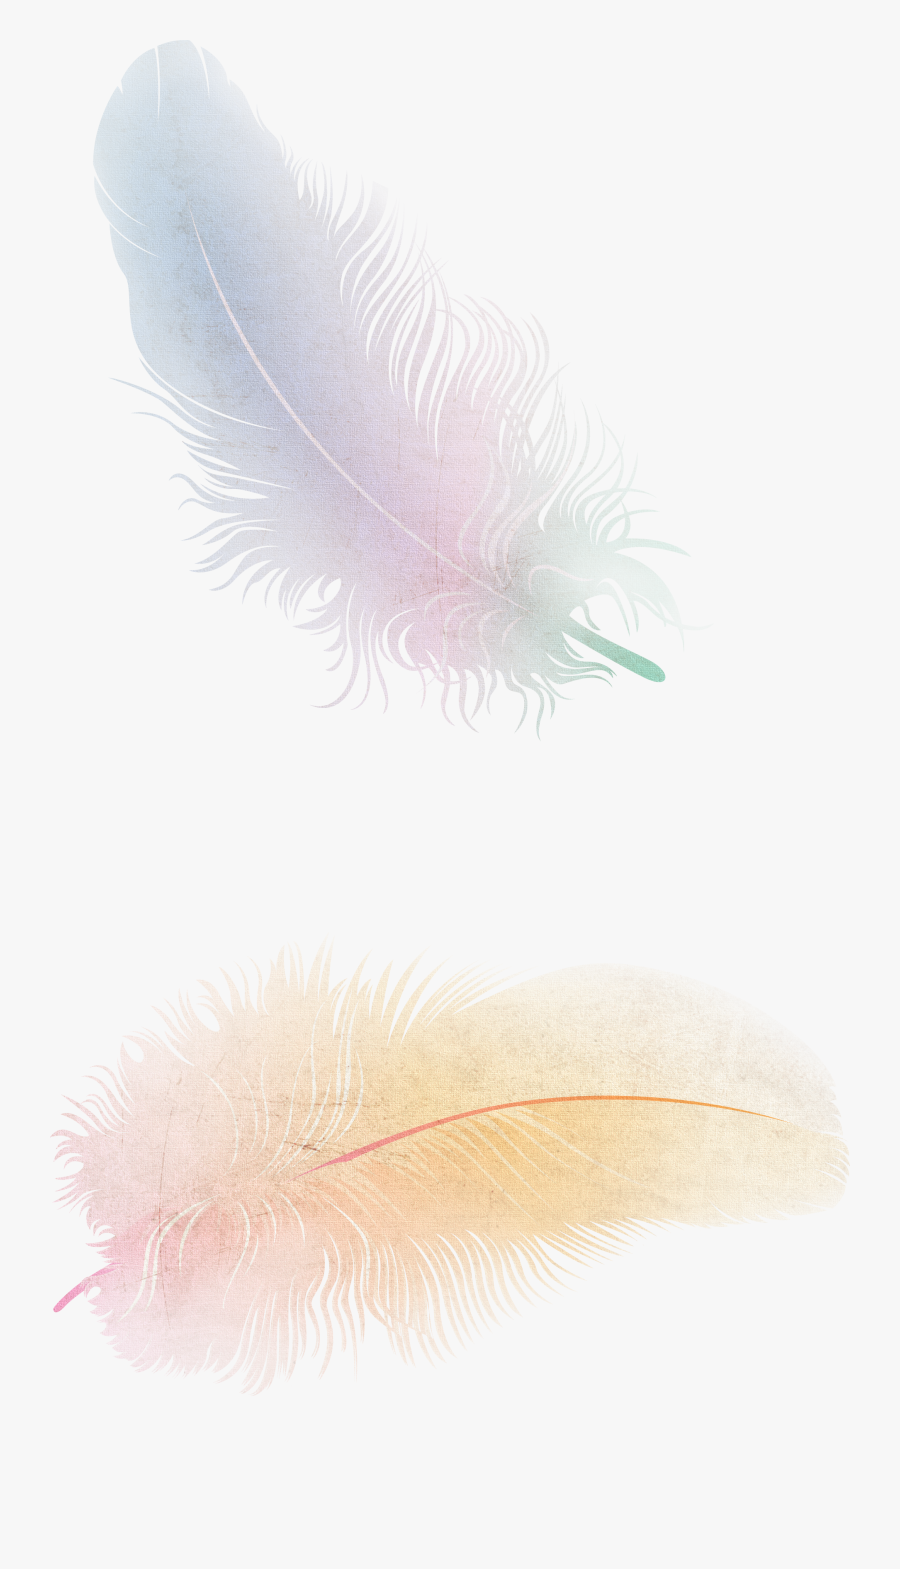 Feather Png Images Free Download - Feather Png, Transparent Clipart